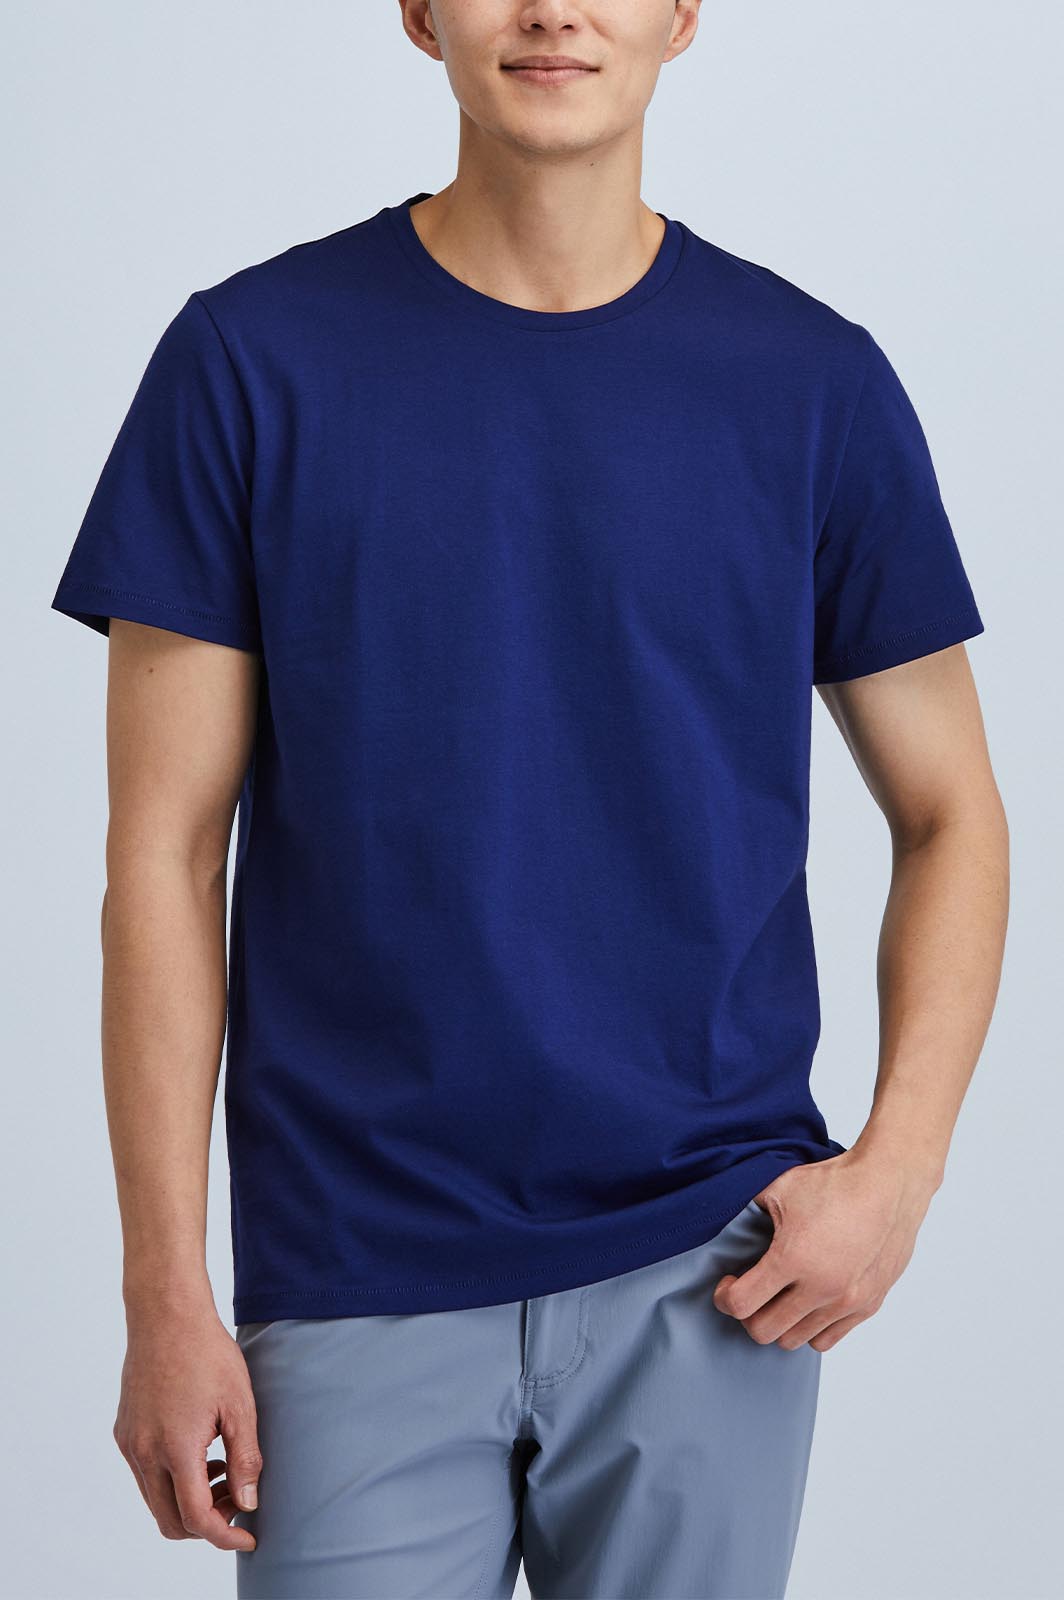 Sustainable Men's Navy Blue - of Apparel